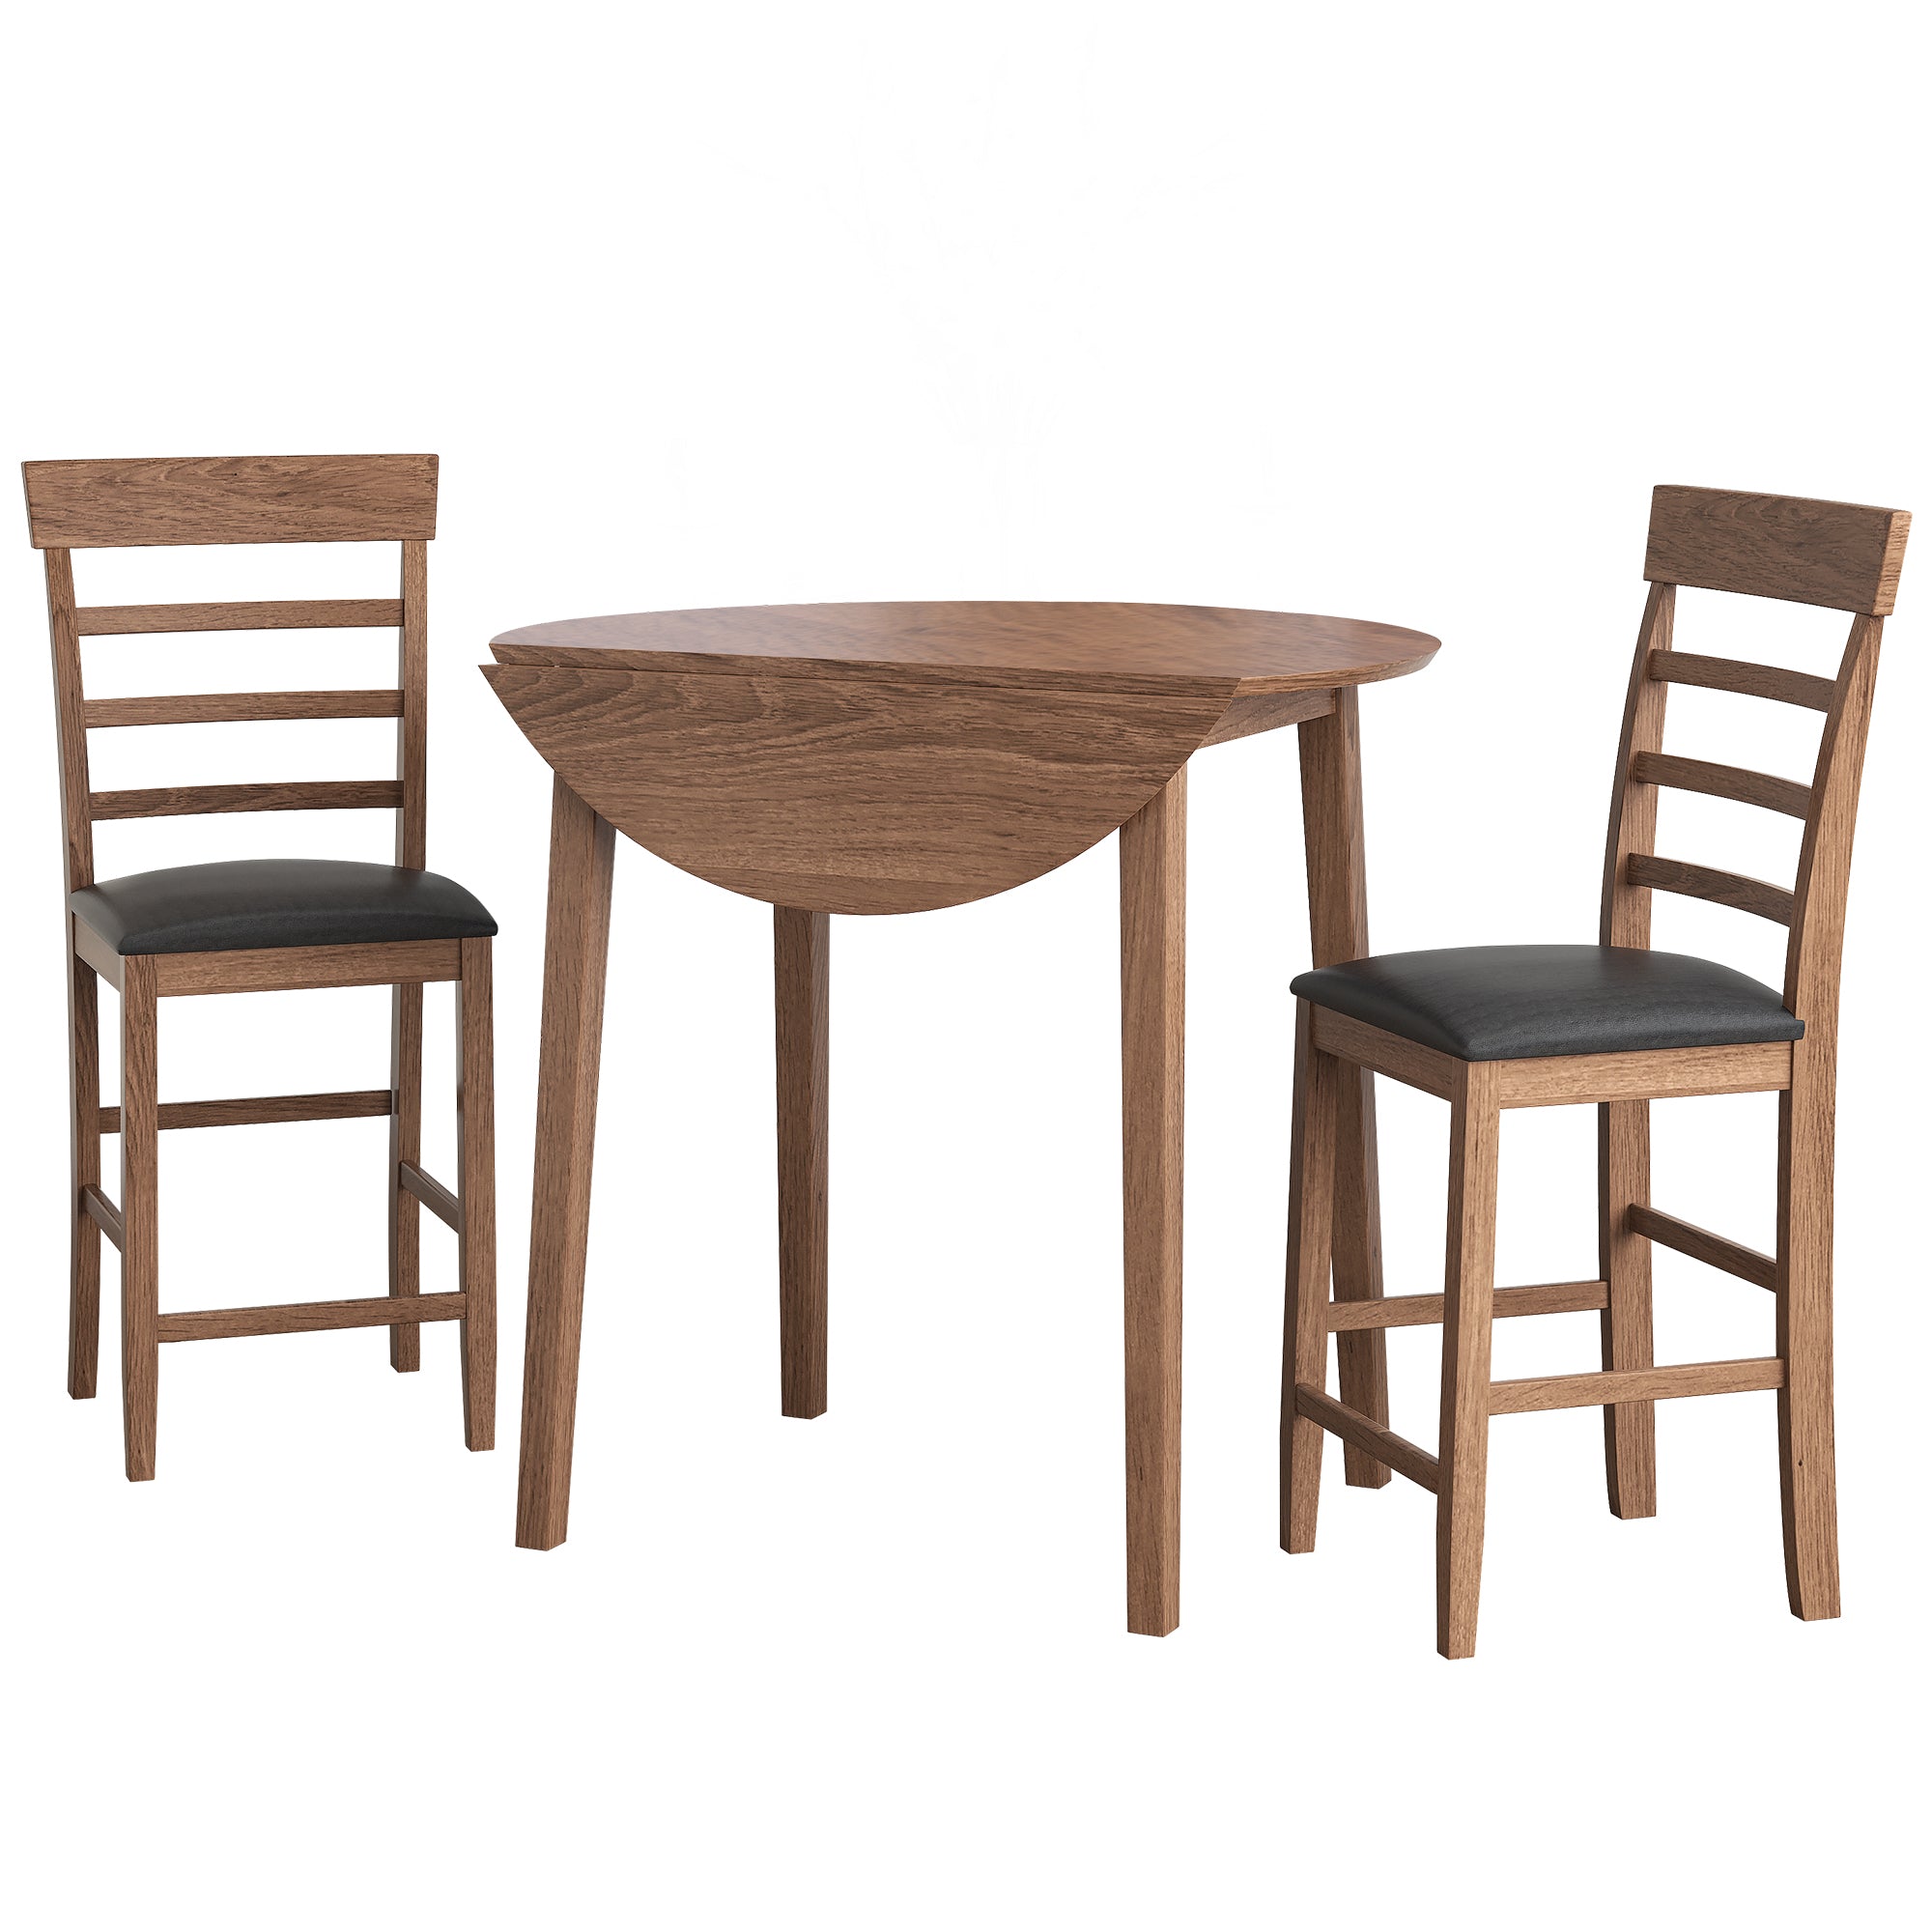 ZNTS 3PCS Retro Round Counter Height Drop-Leaf Table with 2 Upholstered Chairs Rubber wood Dining Table W69177441